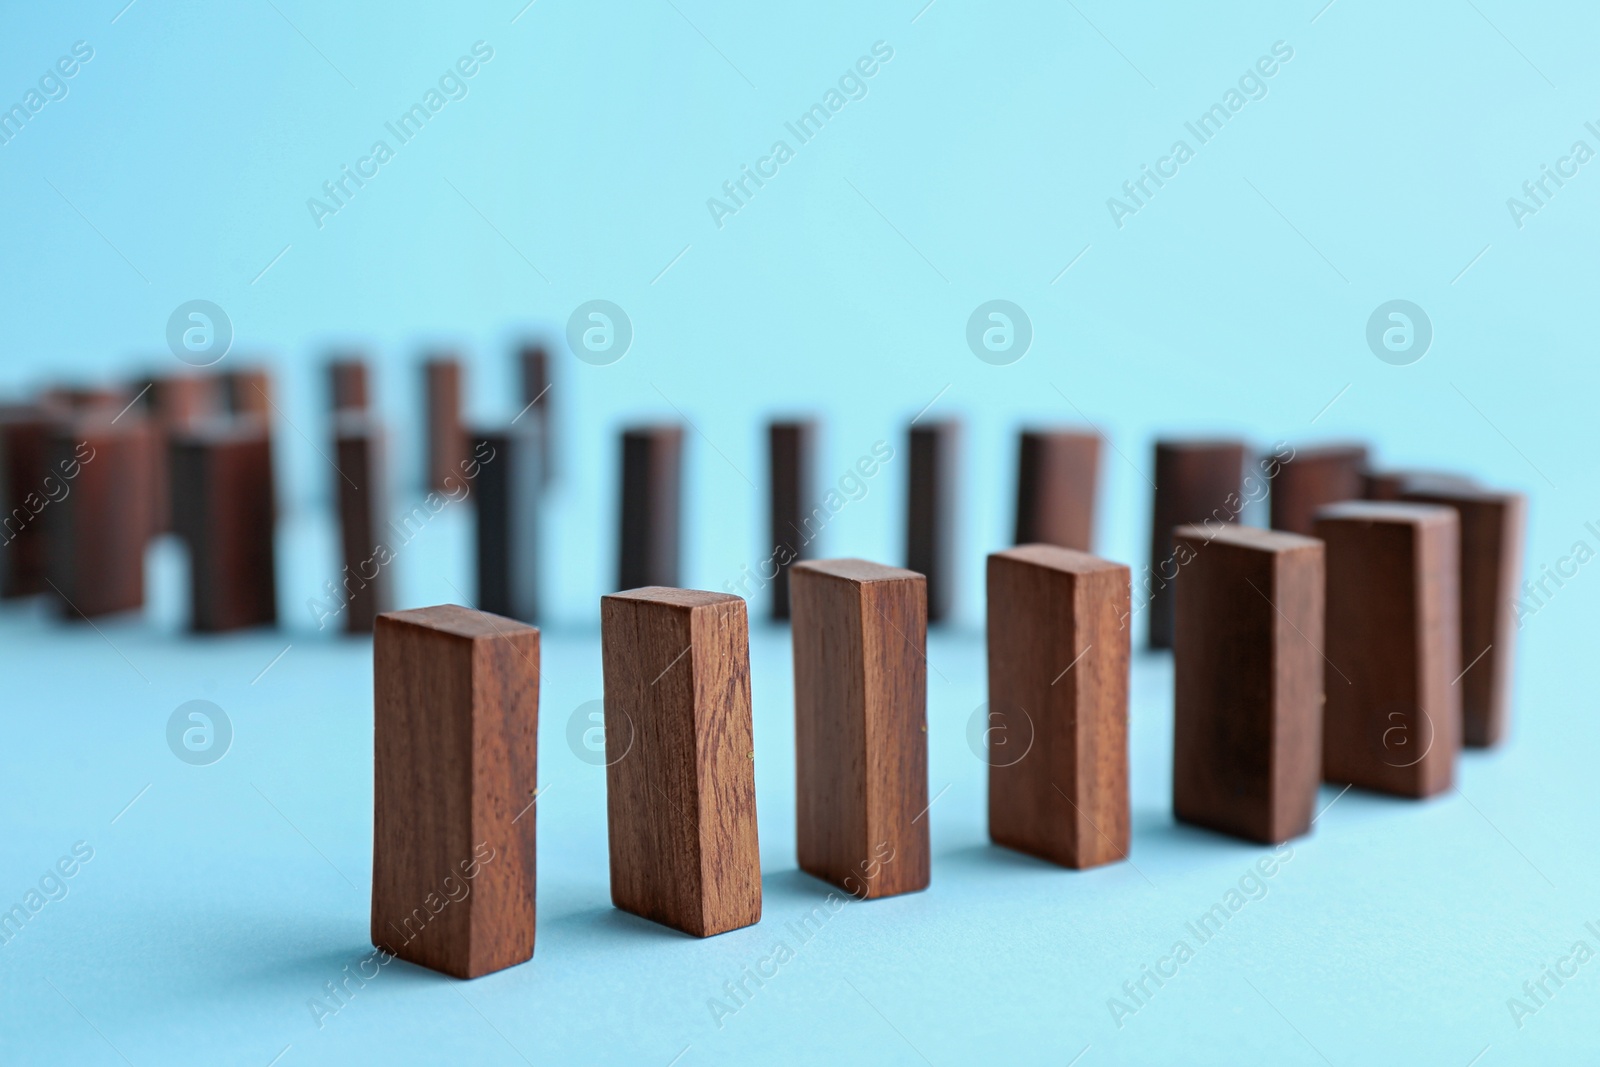 Photo of Row of wooden domino tiles on light blue background